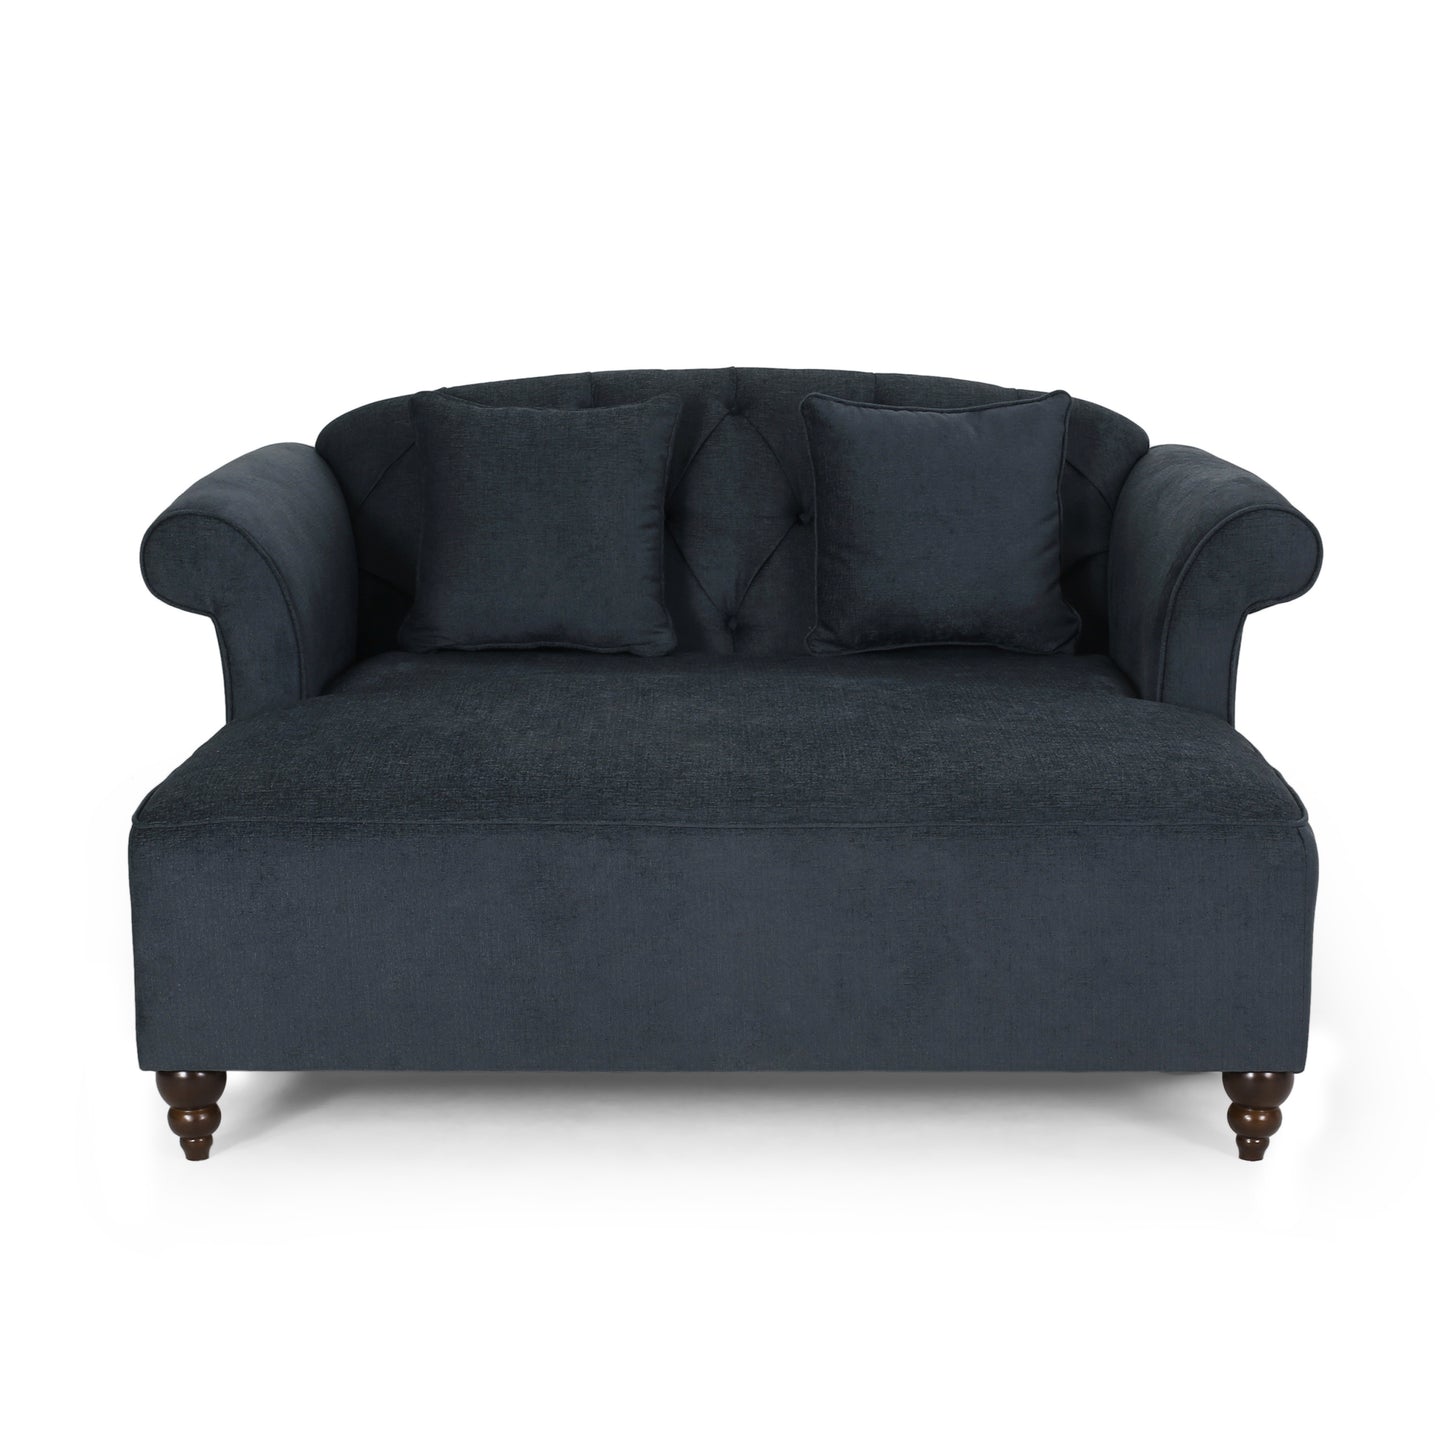 Hurford Contemporary Tufted Double Chaise Lounge with Accent Pillows